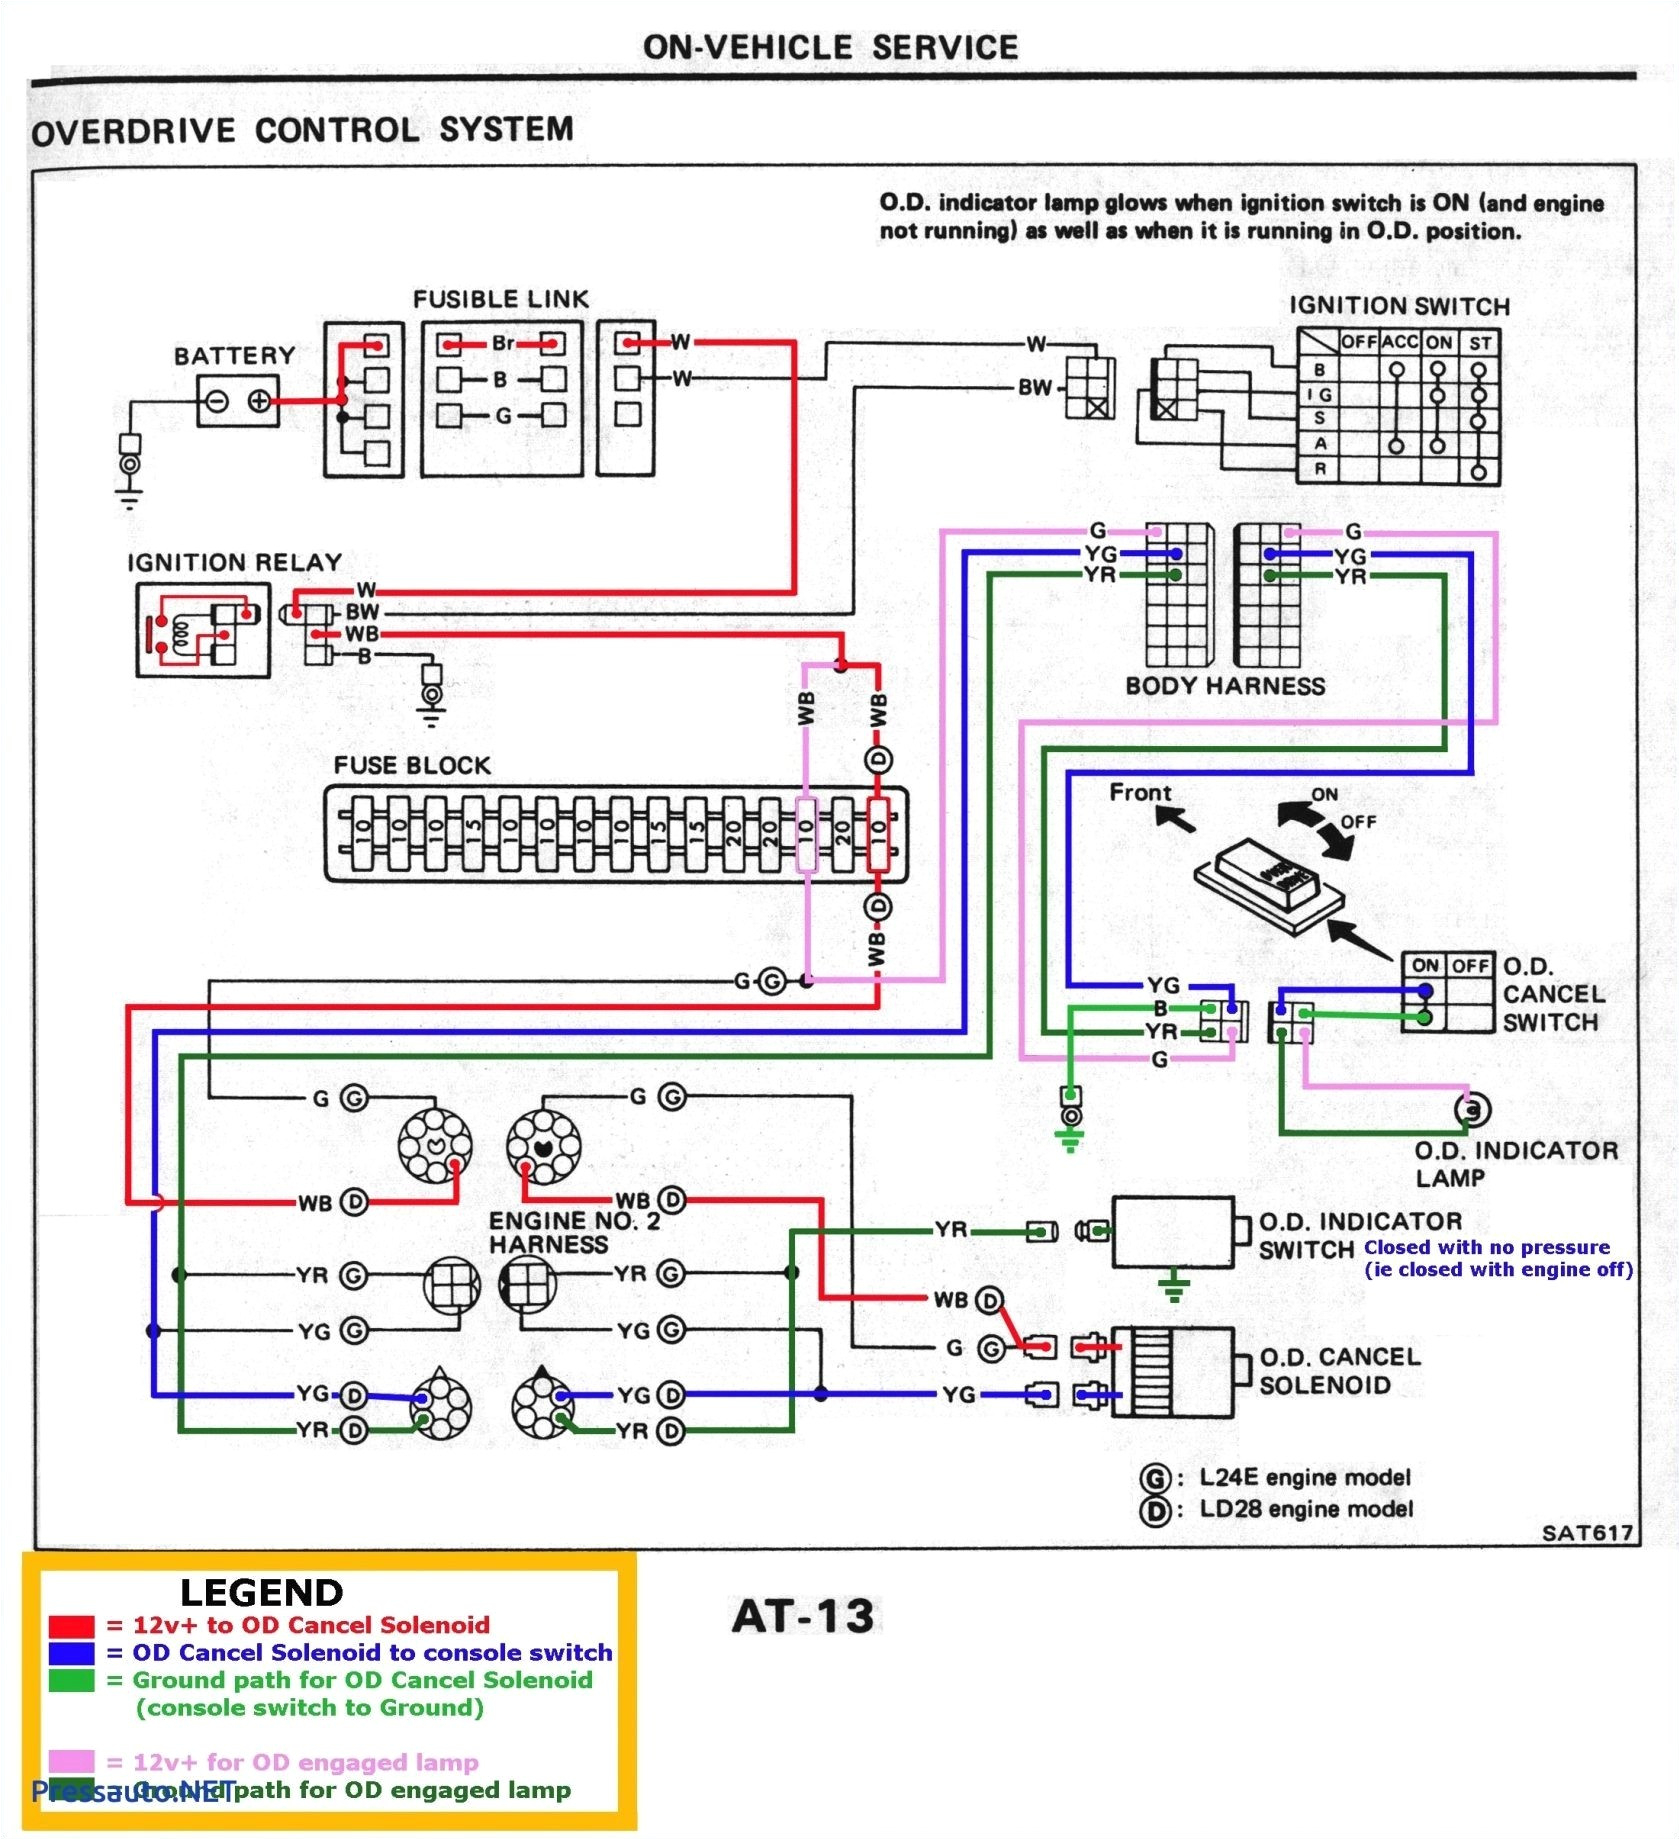 blower motor wiring diagram new emerson electric motors wiringblower motor wiring diagram unique wiring diagram for